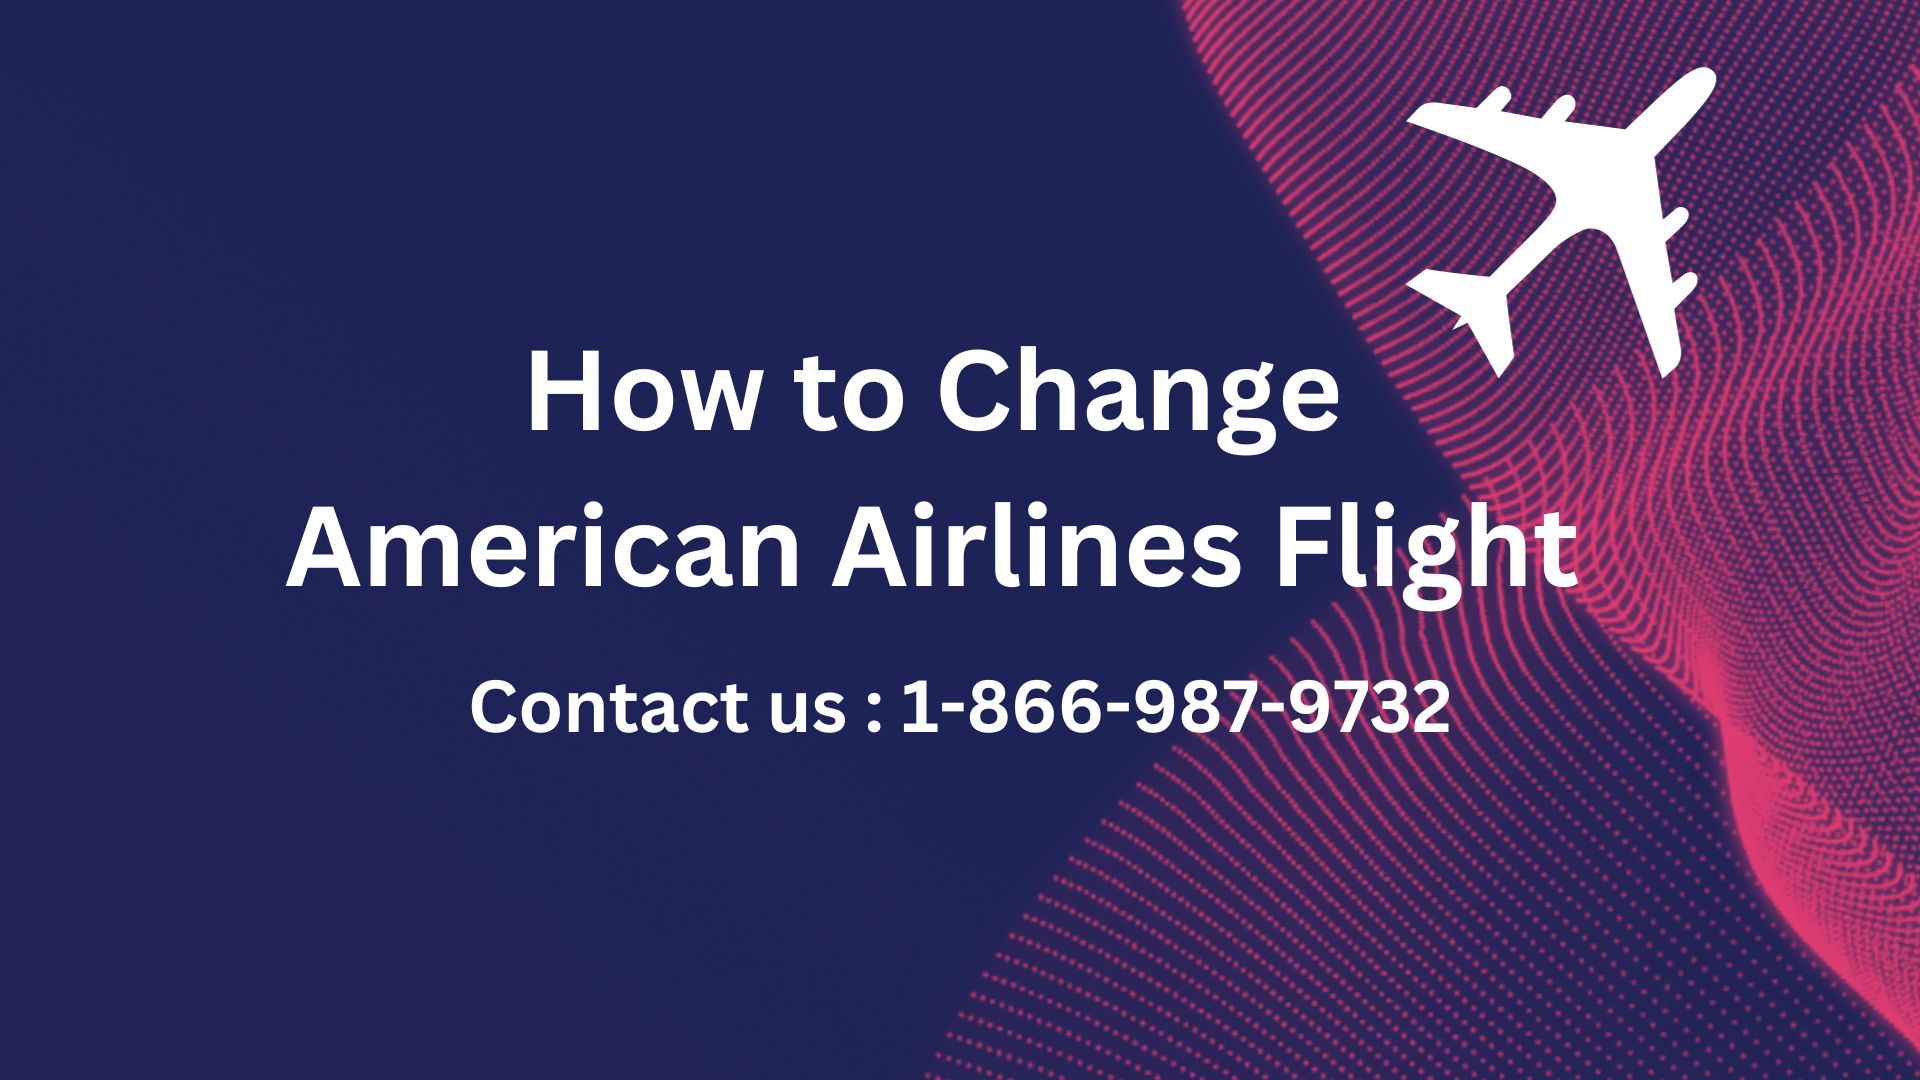 How to Change American Airlines Flight